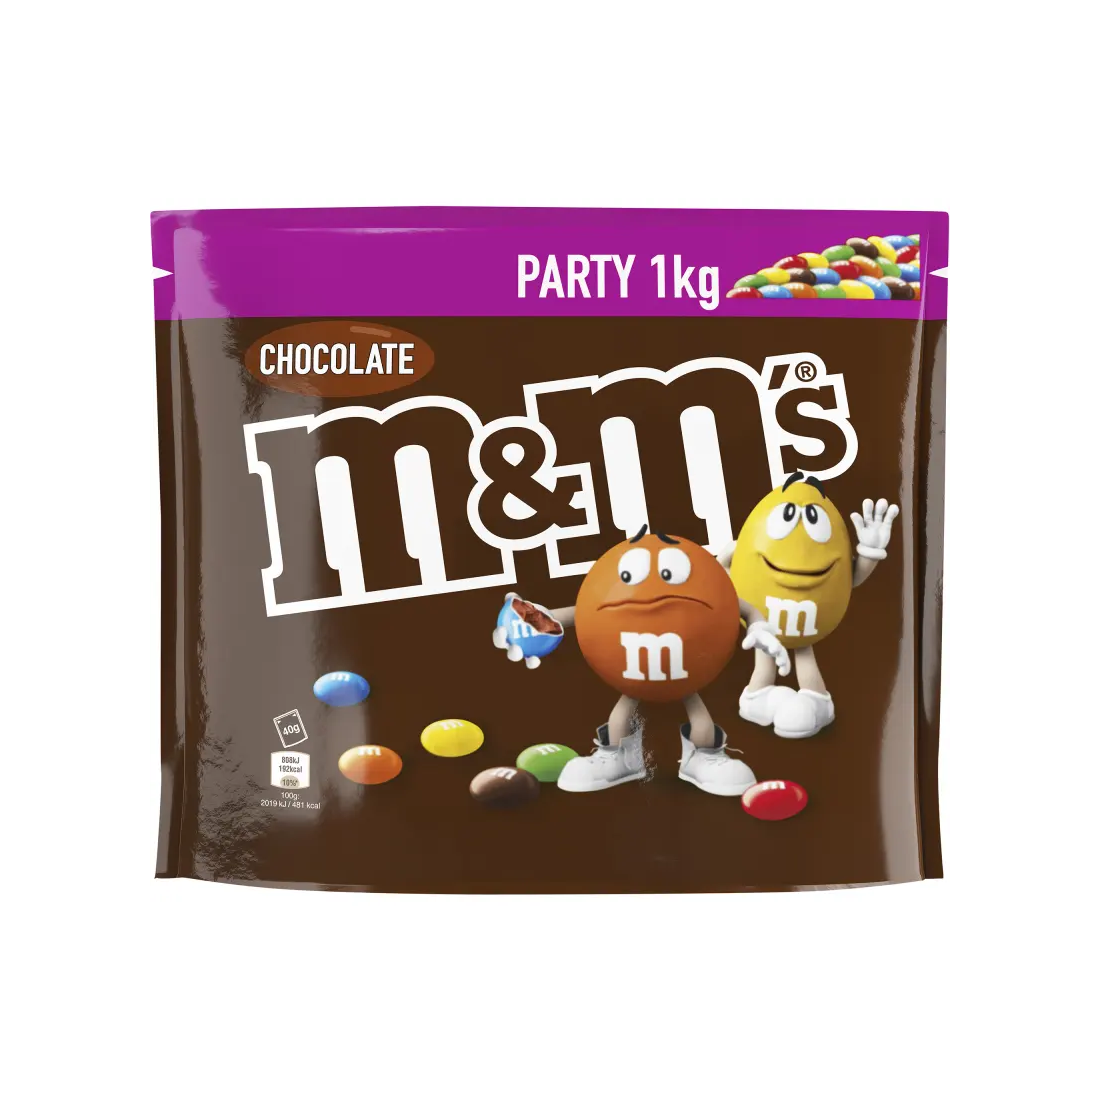 M&m's Chocolate Party 1kg